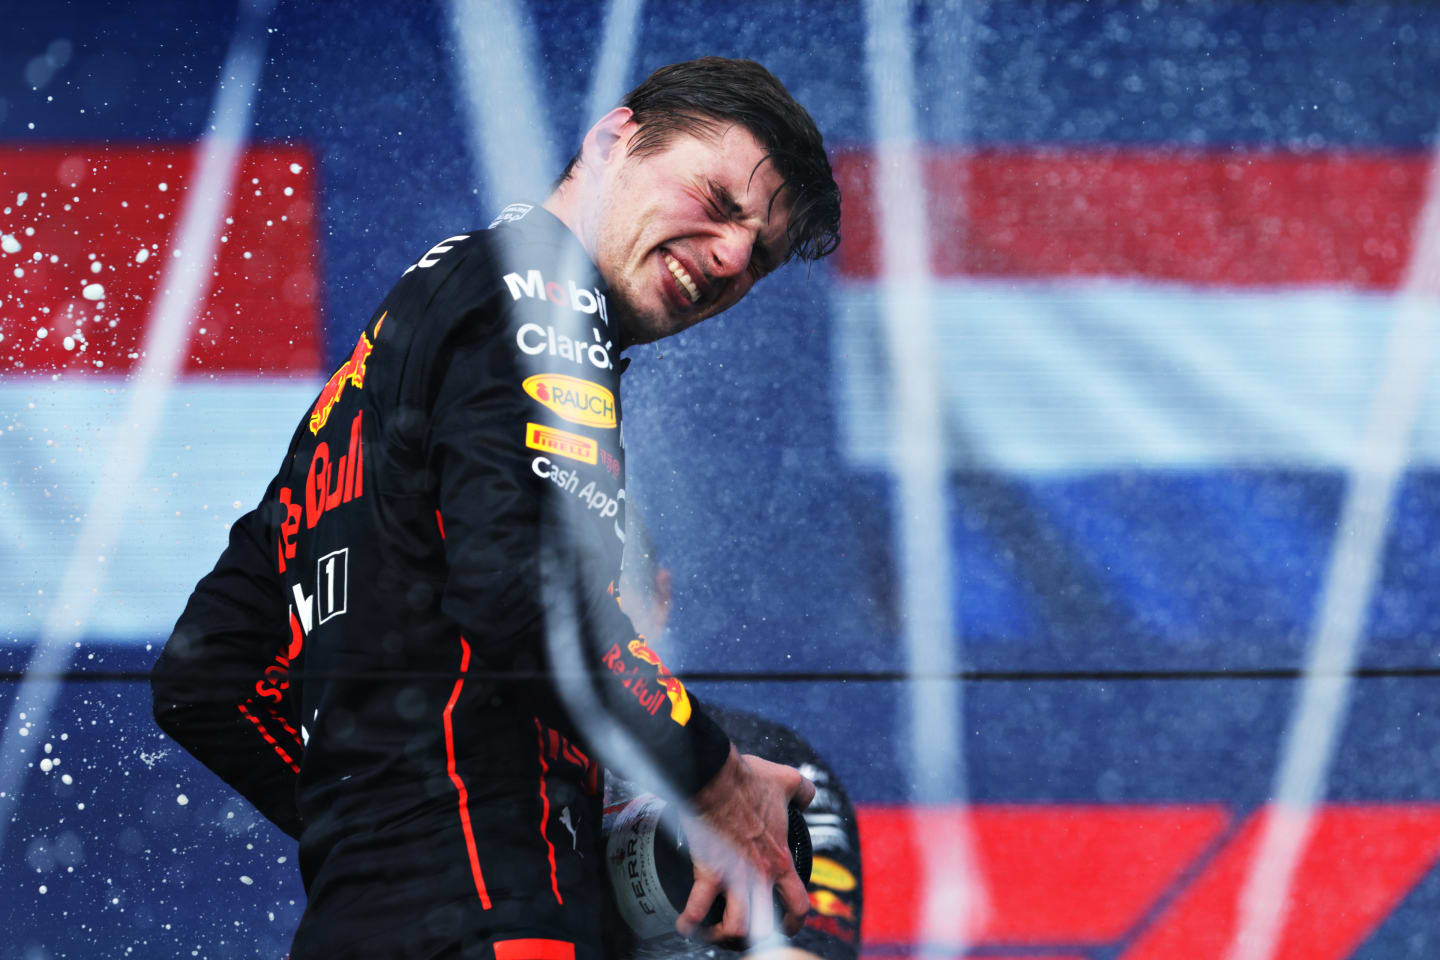 MIAMI, FLORIDA - MAY 08: Race winner Max Verstappen of the Netherlands and Oracle Red Bull Racing celebrates on the podium during the F1 Grand Prix of Miami at the Miami International Autodrome on May 08, 2022 in Miami, Florida. (Photo by Mark Thompson/Getty Images)